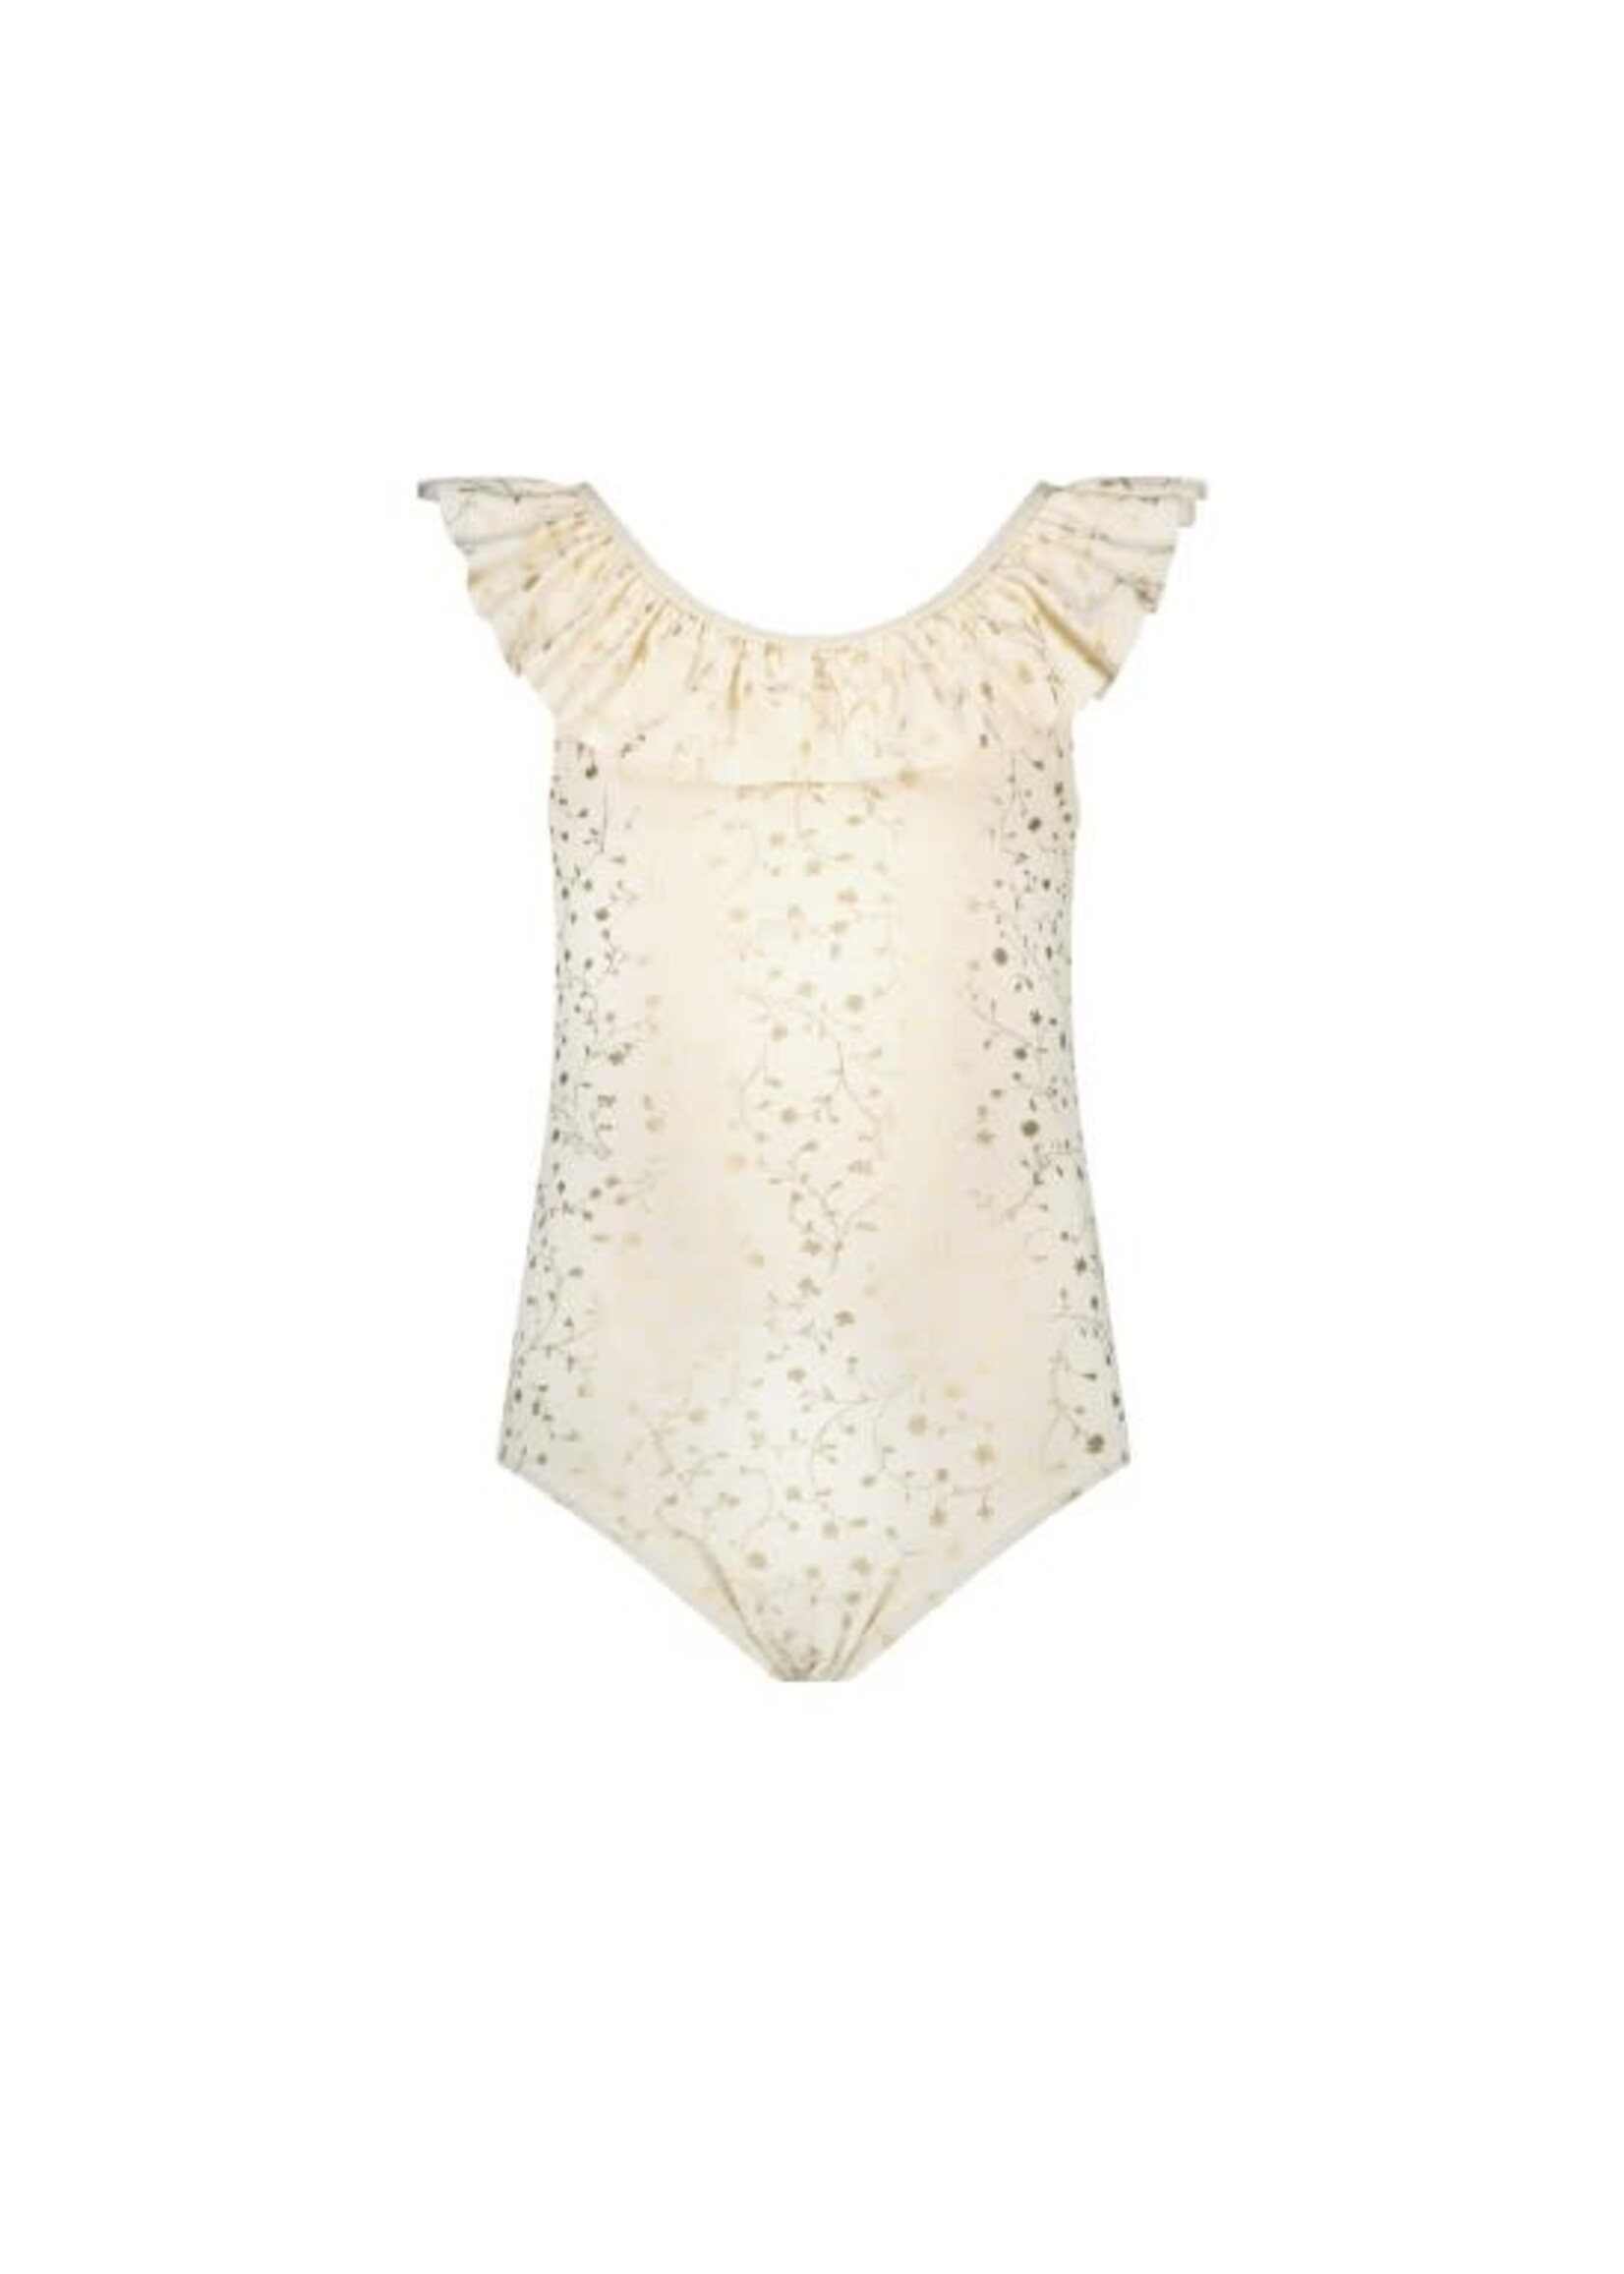 Le Chic Le Chic ZOÉ ruffle-neck bathing suit C401-5051 Pearled Ivory